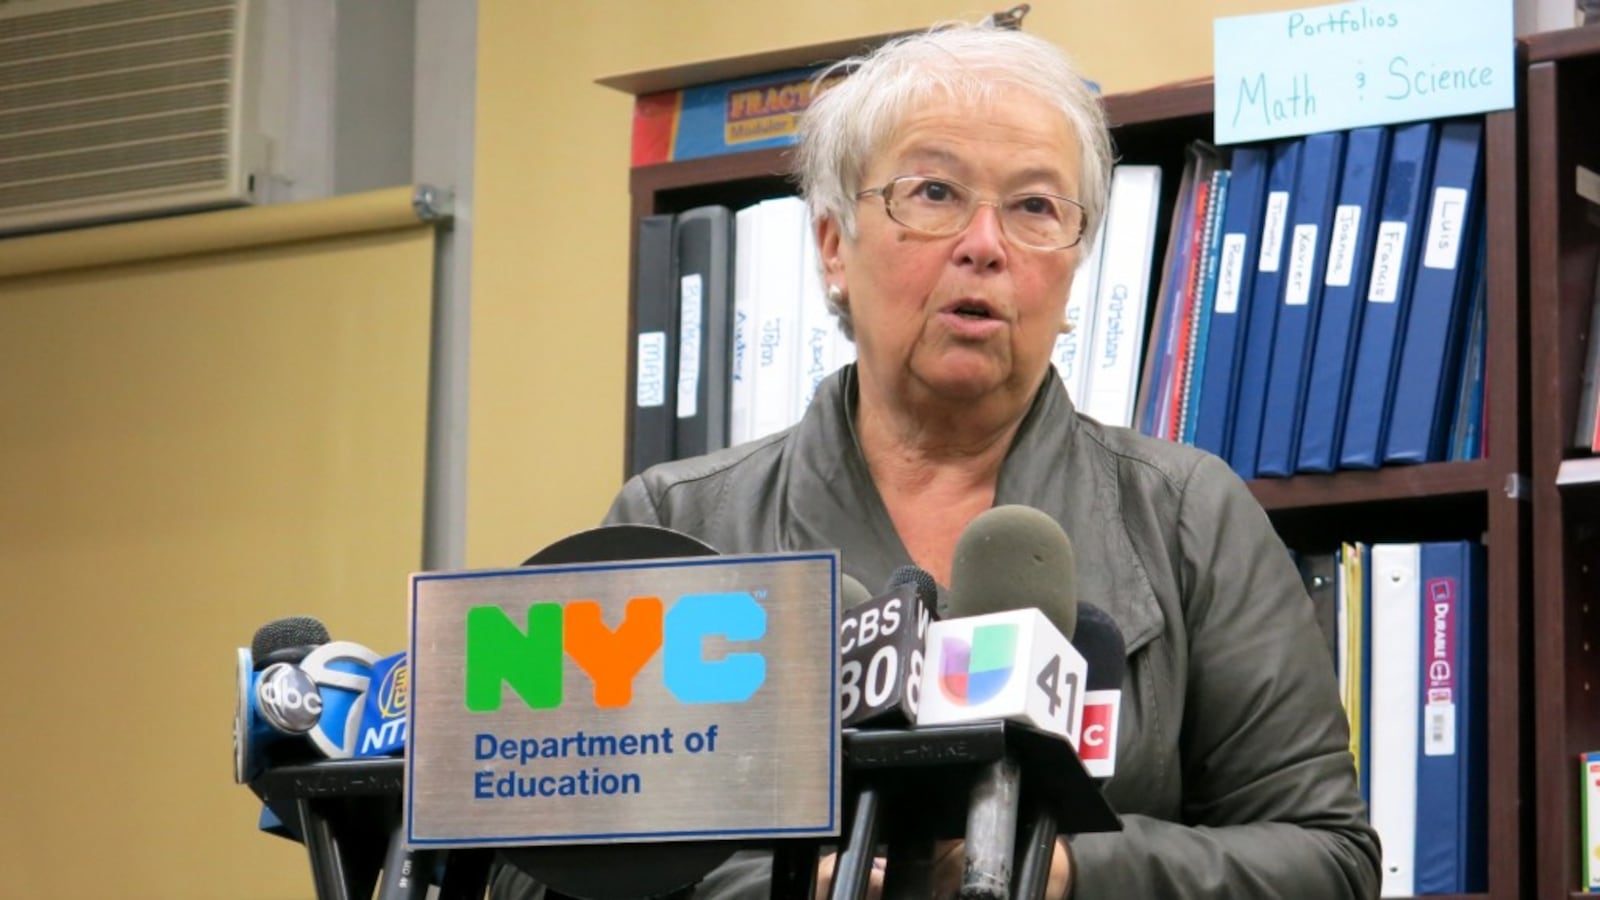 Carmen Fariña at the Bronx’s M.S. 223, which she visited on her first school day as chancellor. There she said she supported the Common Core standards, but that teachers need more support.